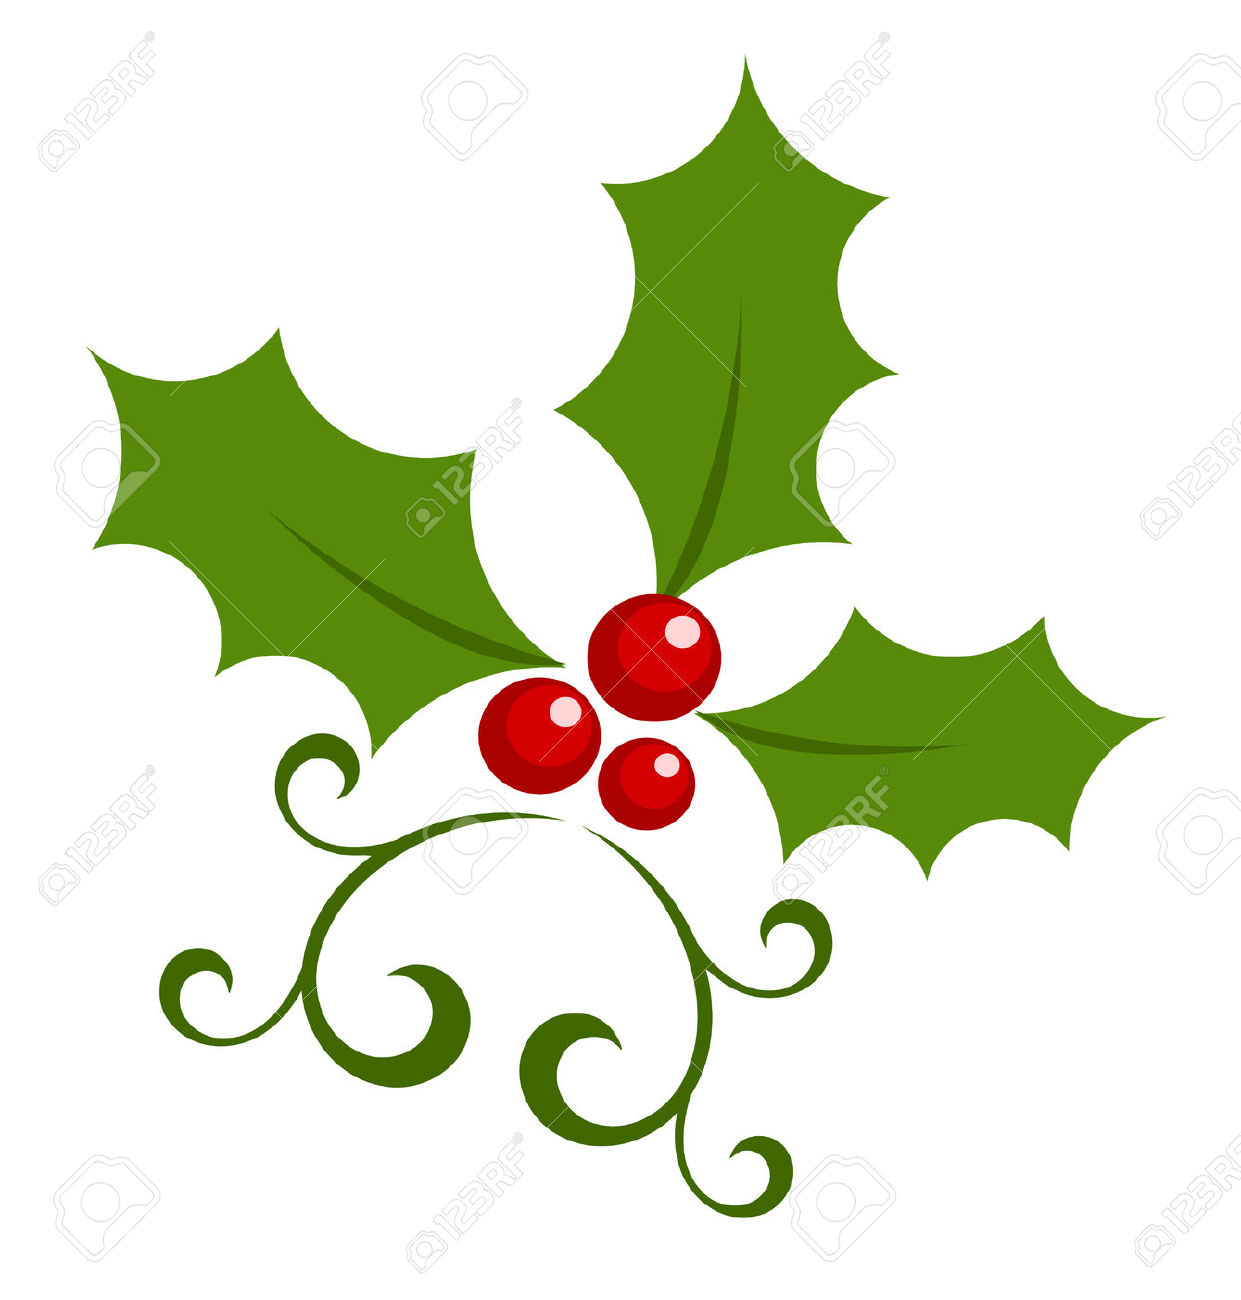 Free download best on. Berry clipart leaves holly